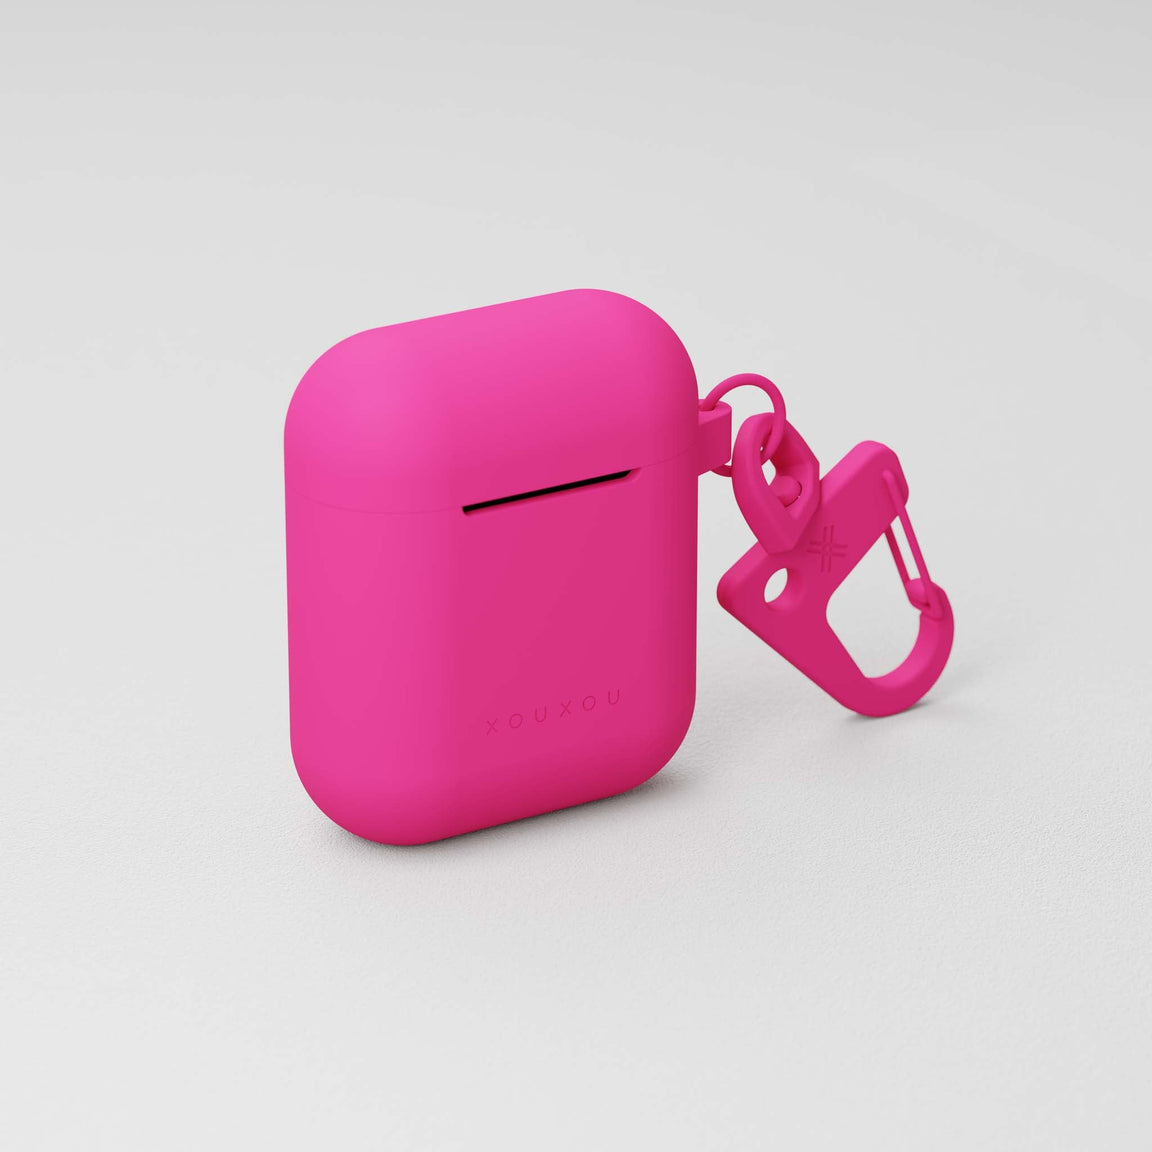 Apple AirPods 1st & 2nd generation case in Pink with soft-touch finish and carabiner | XOUXOU